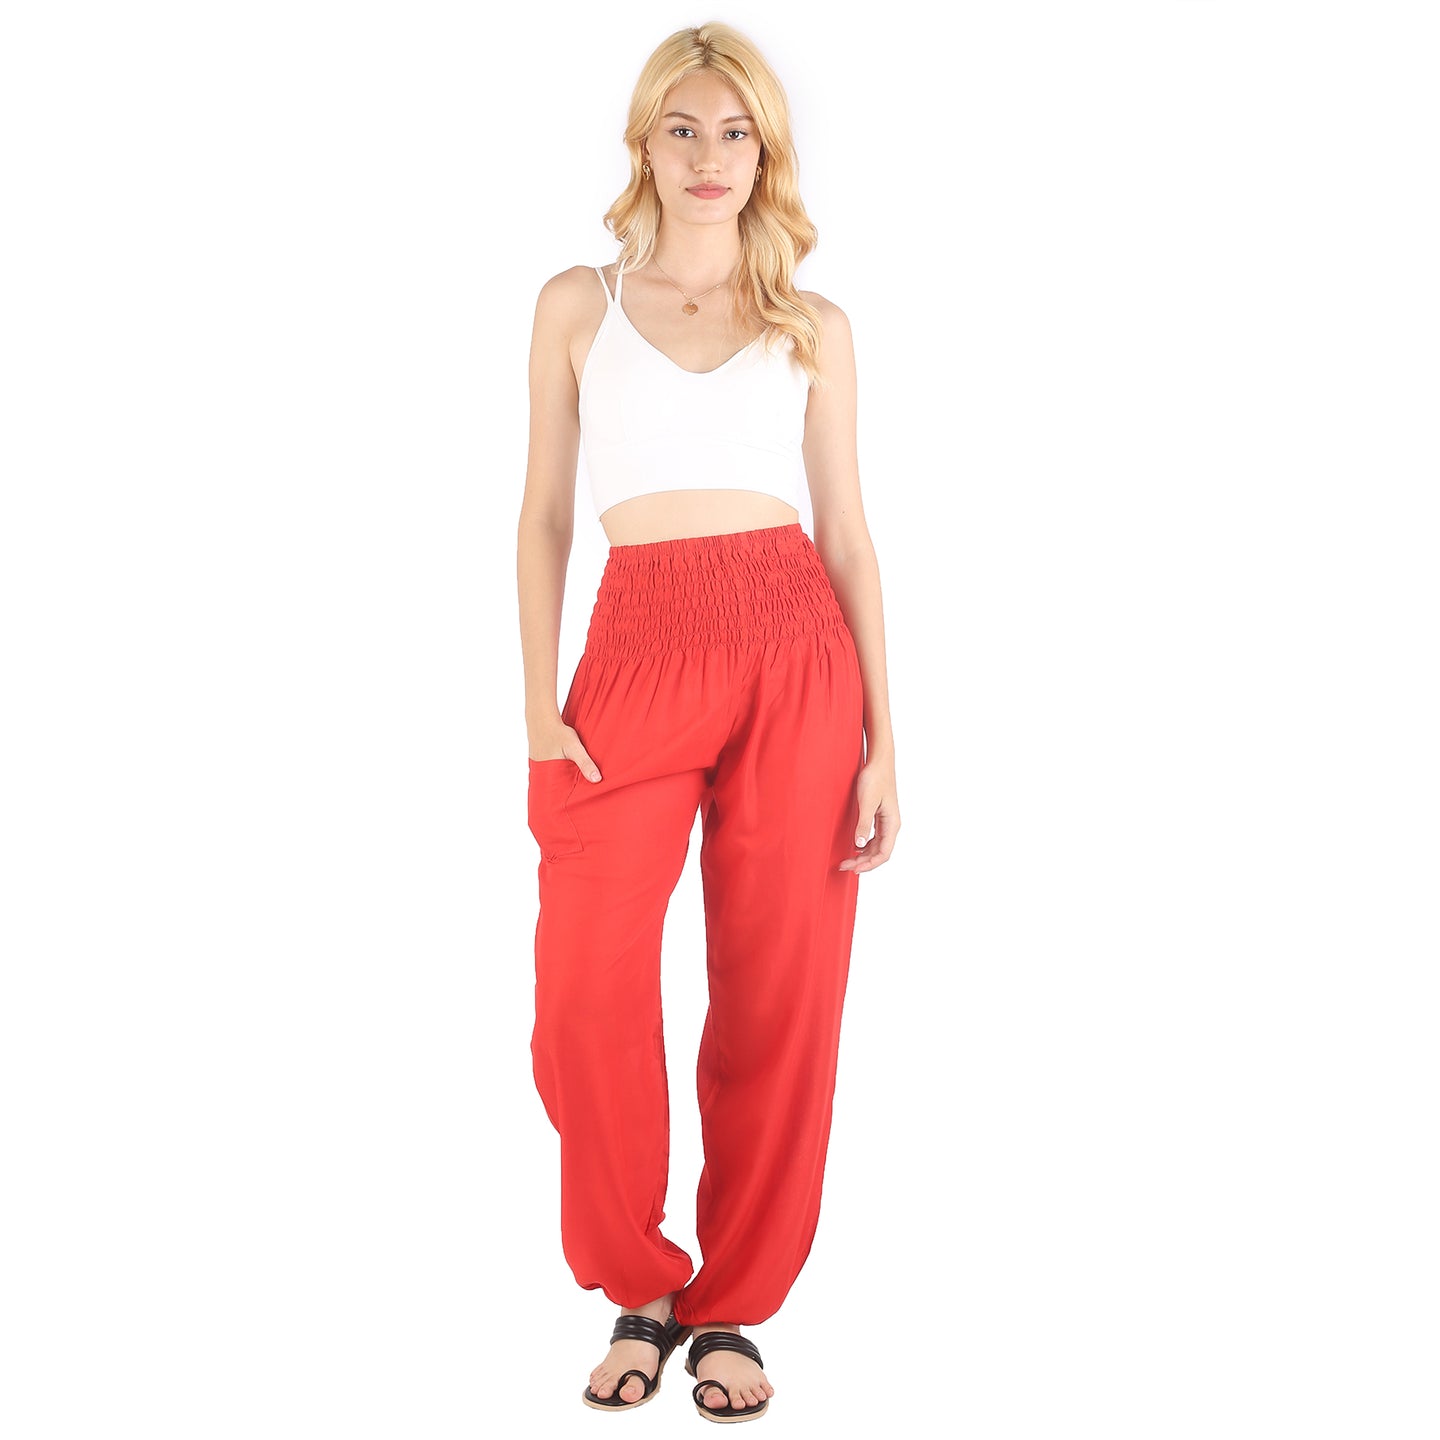 Solid color women harem pants in Bright Red PP0004 020000 12